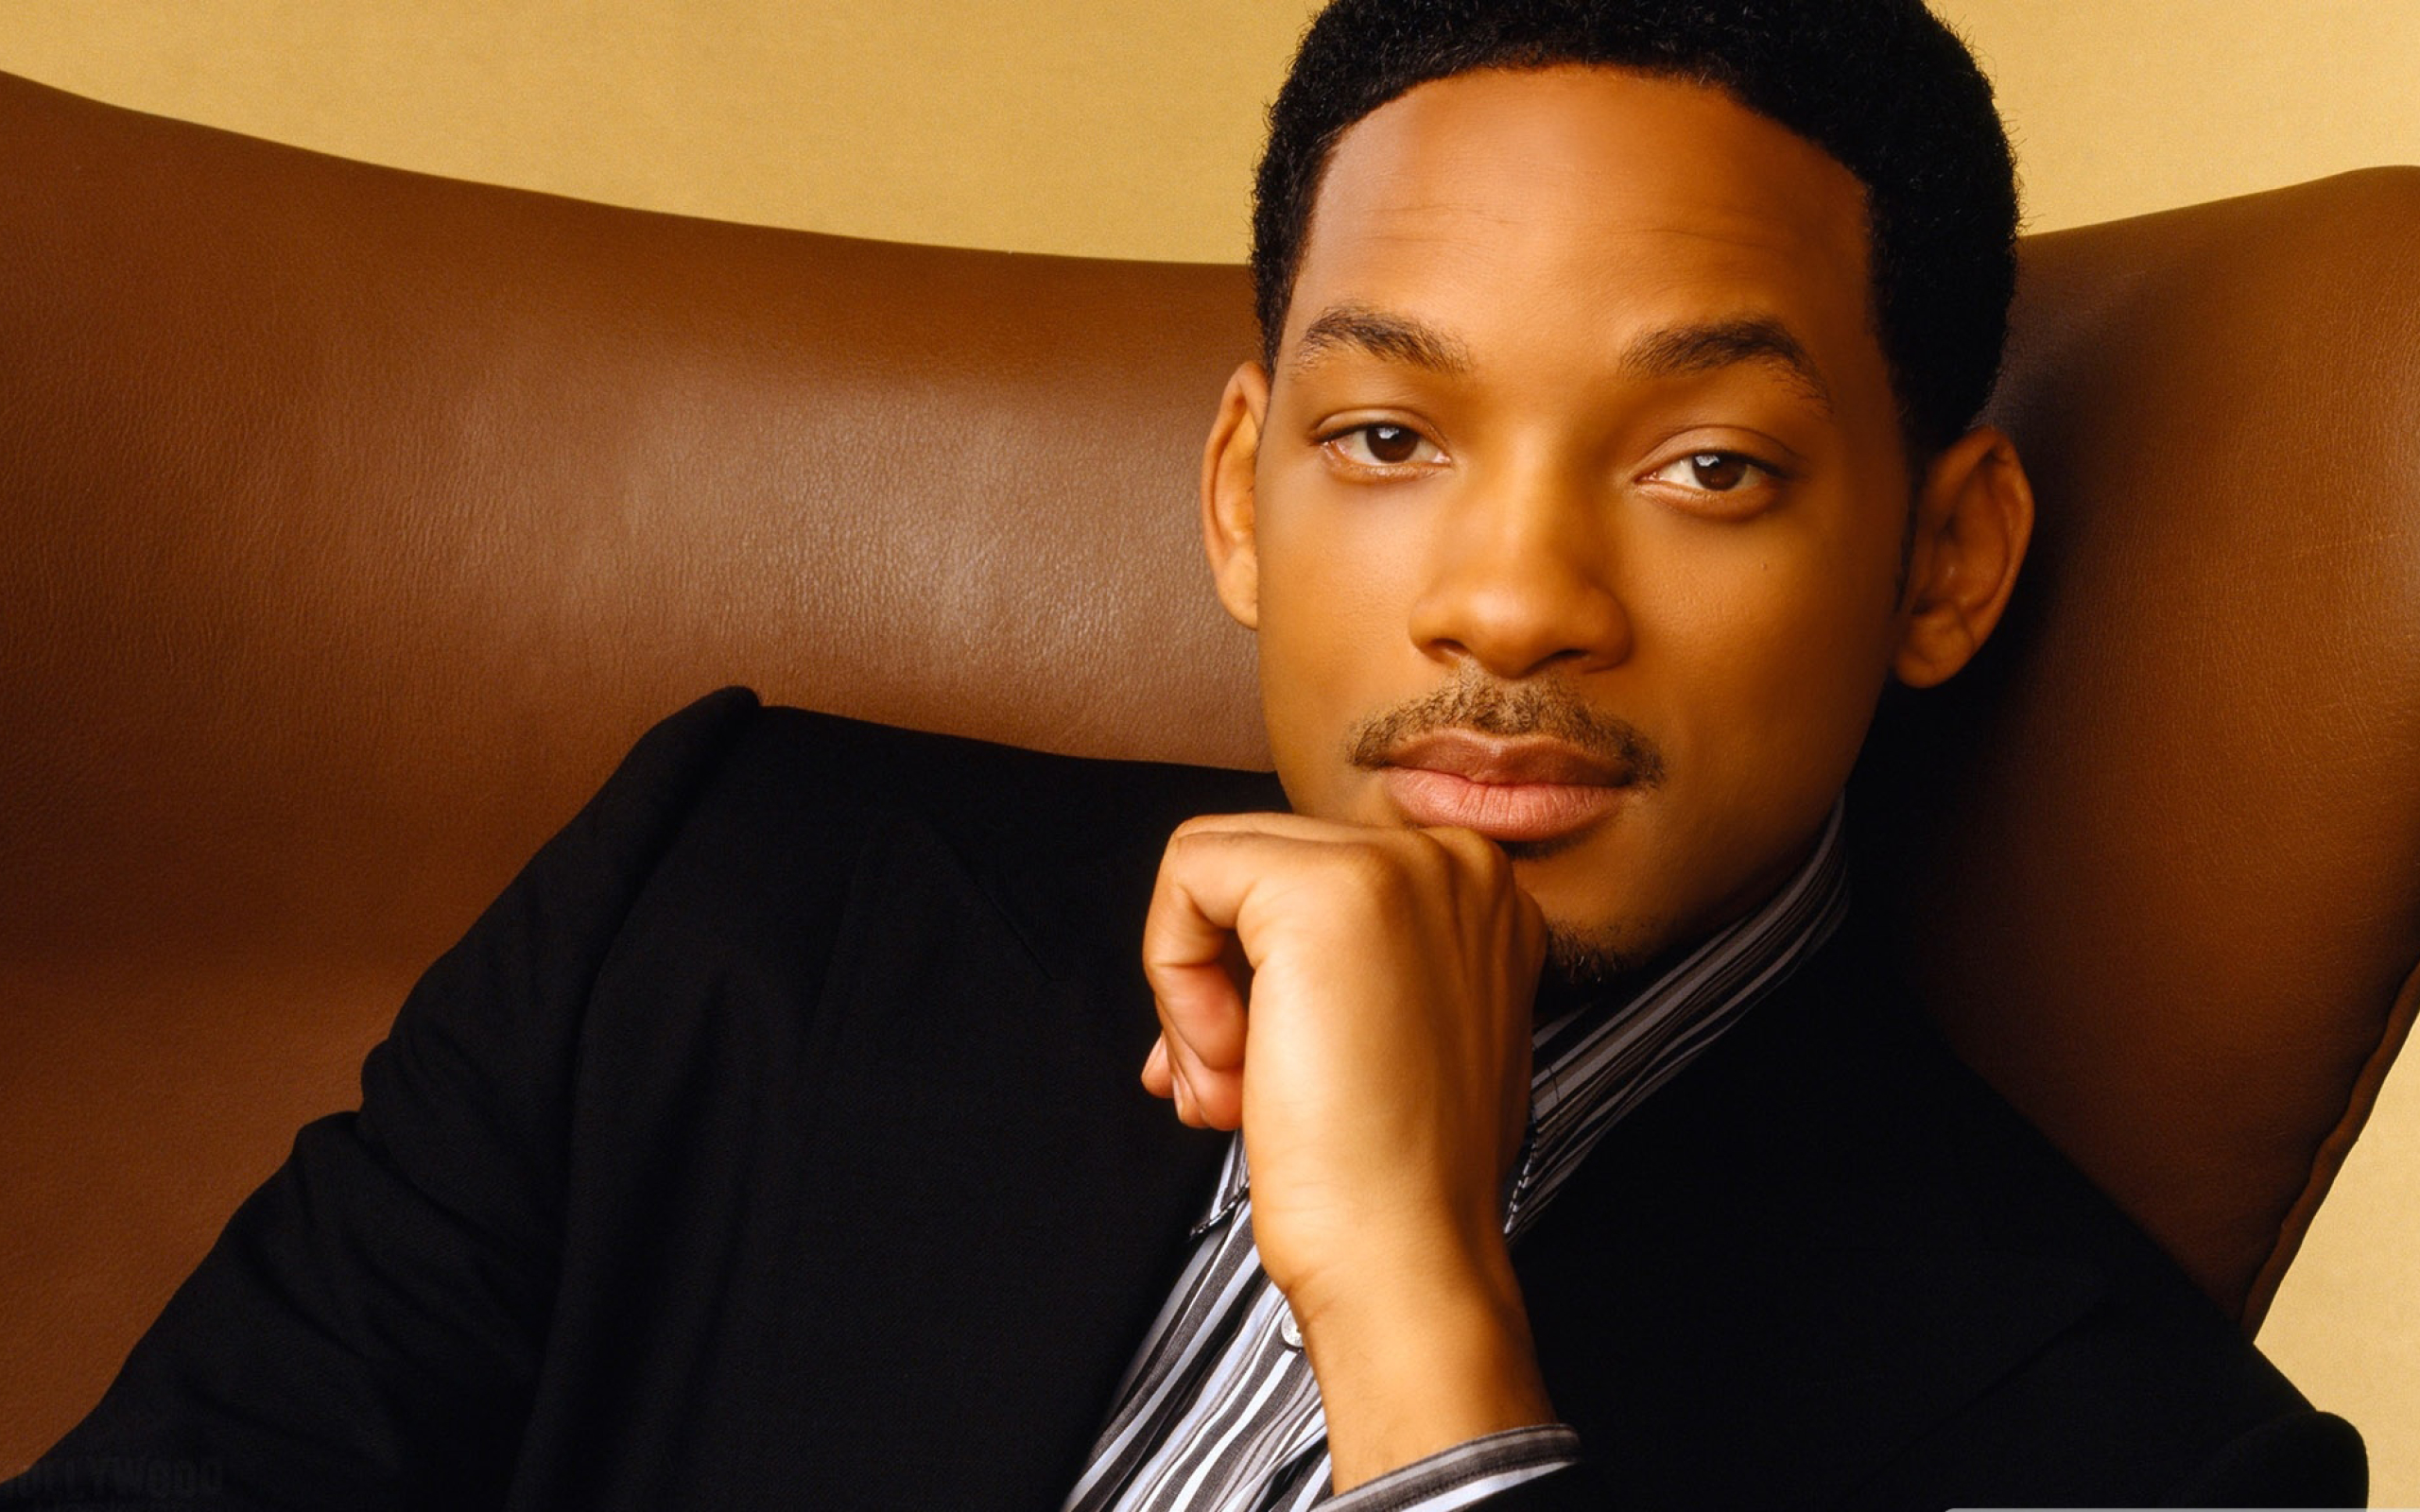 Will Smith sitting on a couch with his hand on his chin